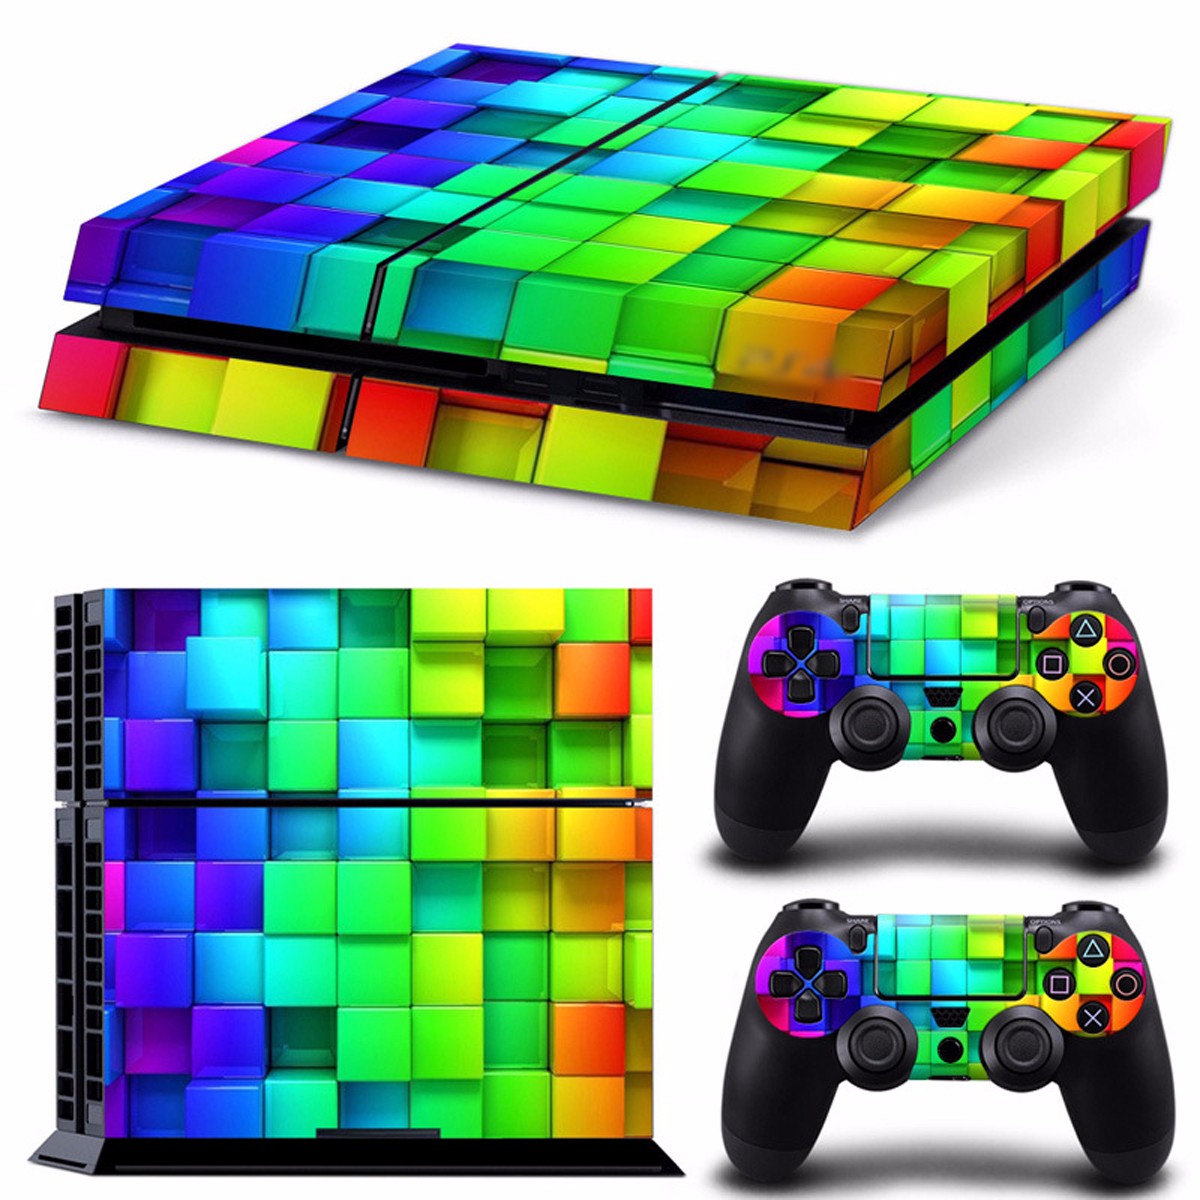 

Lattice Style Vinyl Skin Decal For PS4 Play Station 4 Console and 2 Controllers